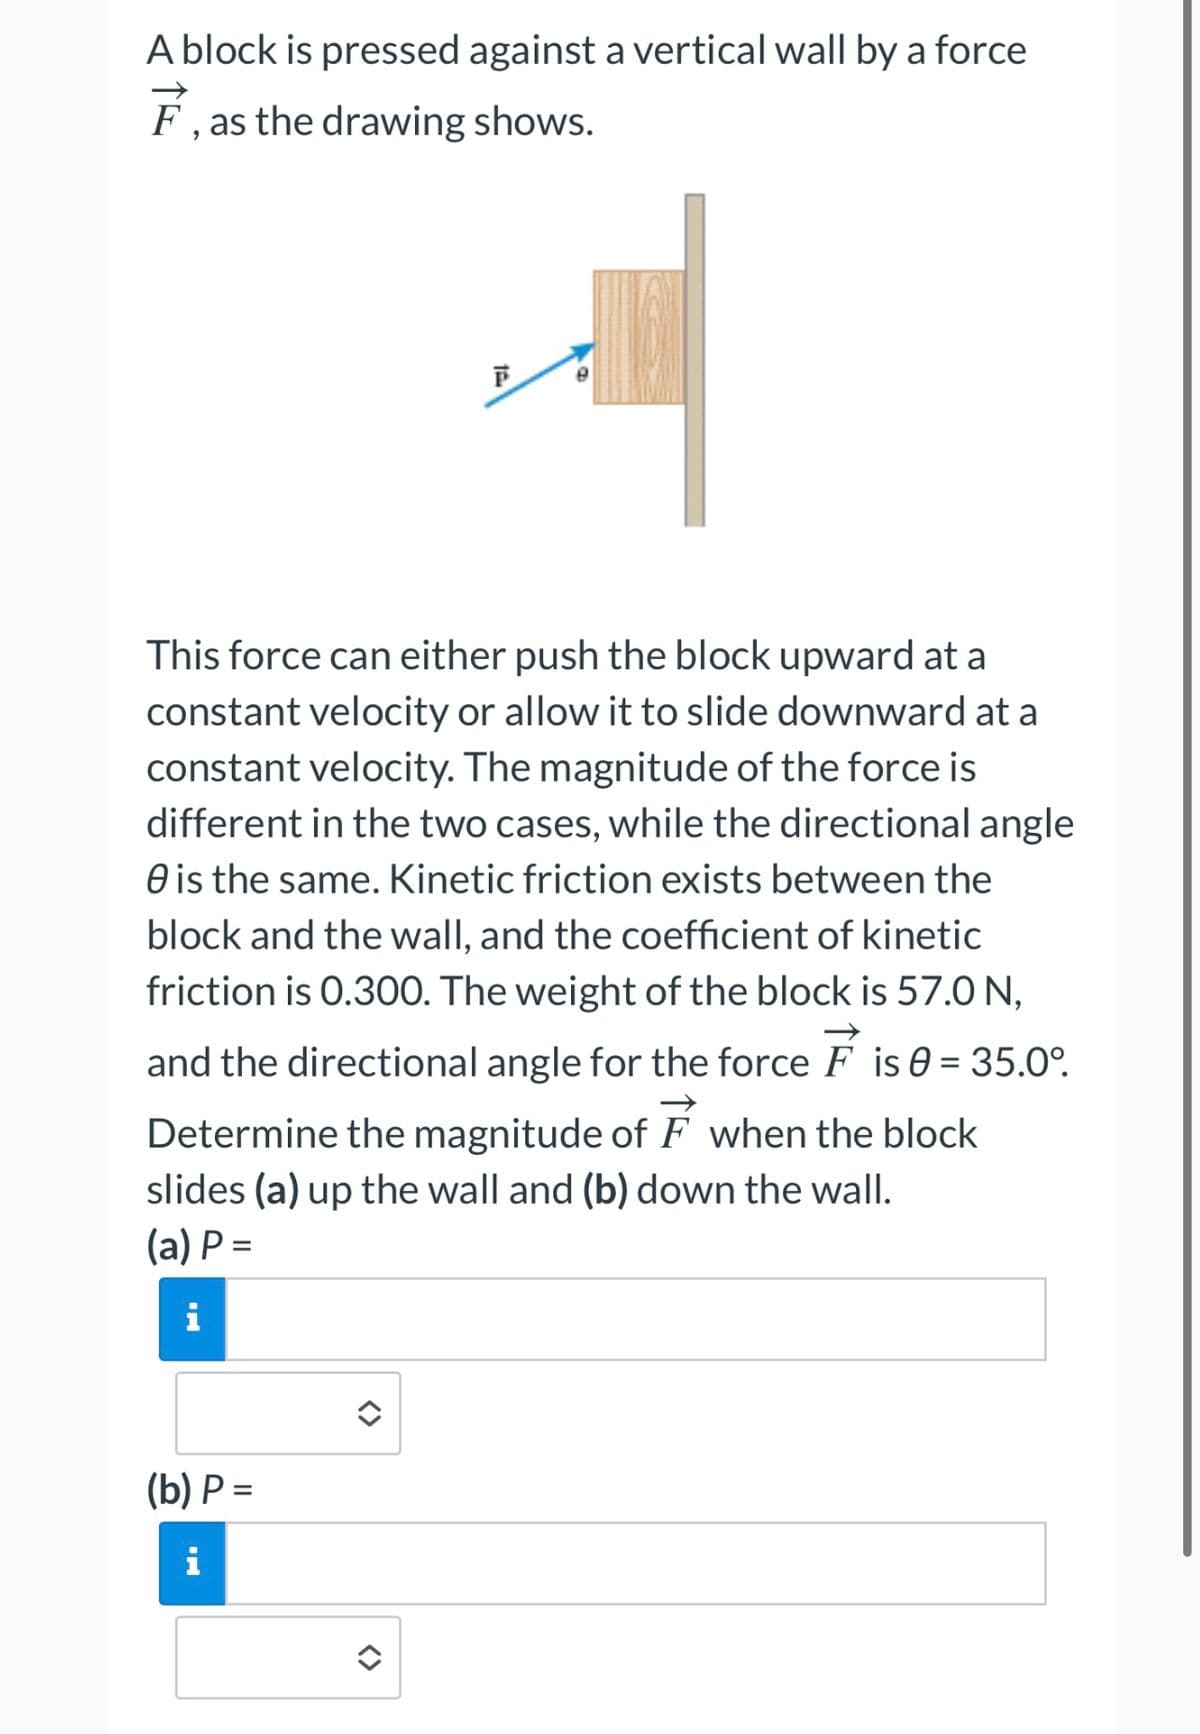 A block is pressed against a vertical wall by a force
F, as the drawing shows.
F
This force can either push the block upward at a
constant velocity or allow it to slide downward at a
constant velocity. The magnitude of the force is
different in the two cases, while the directional angle
e is the same. Kinetic friction exists between the
block and the wall, and the coefficient of kinetic
friction is 0.300. The weight of the block is 57.0 N,
and the directional angle for the force F is 0 = 35.0°.
Determine the magnitude of when the block
slides (a) up the wall and (b) down the wall.
(a) P=
i
(b) P=
i